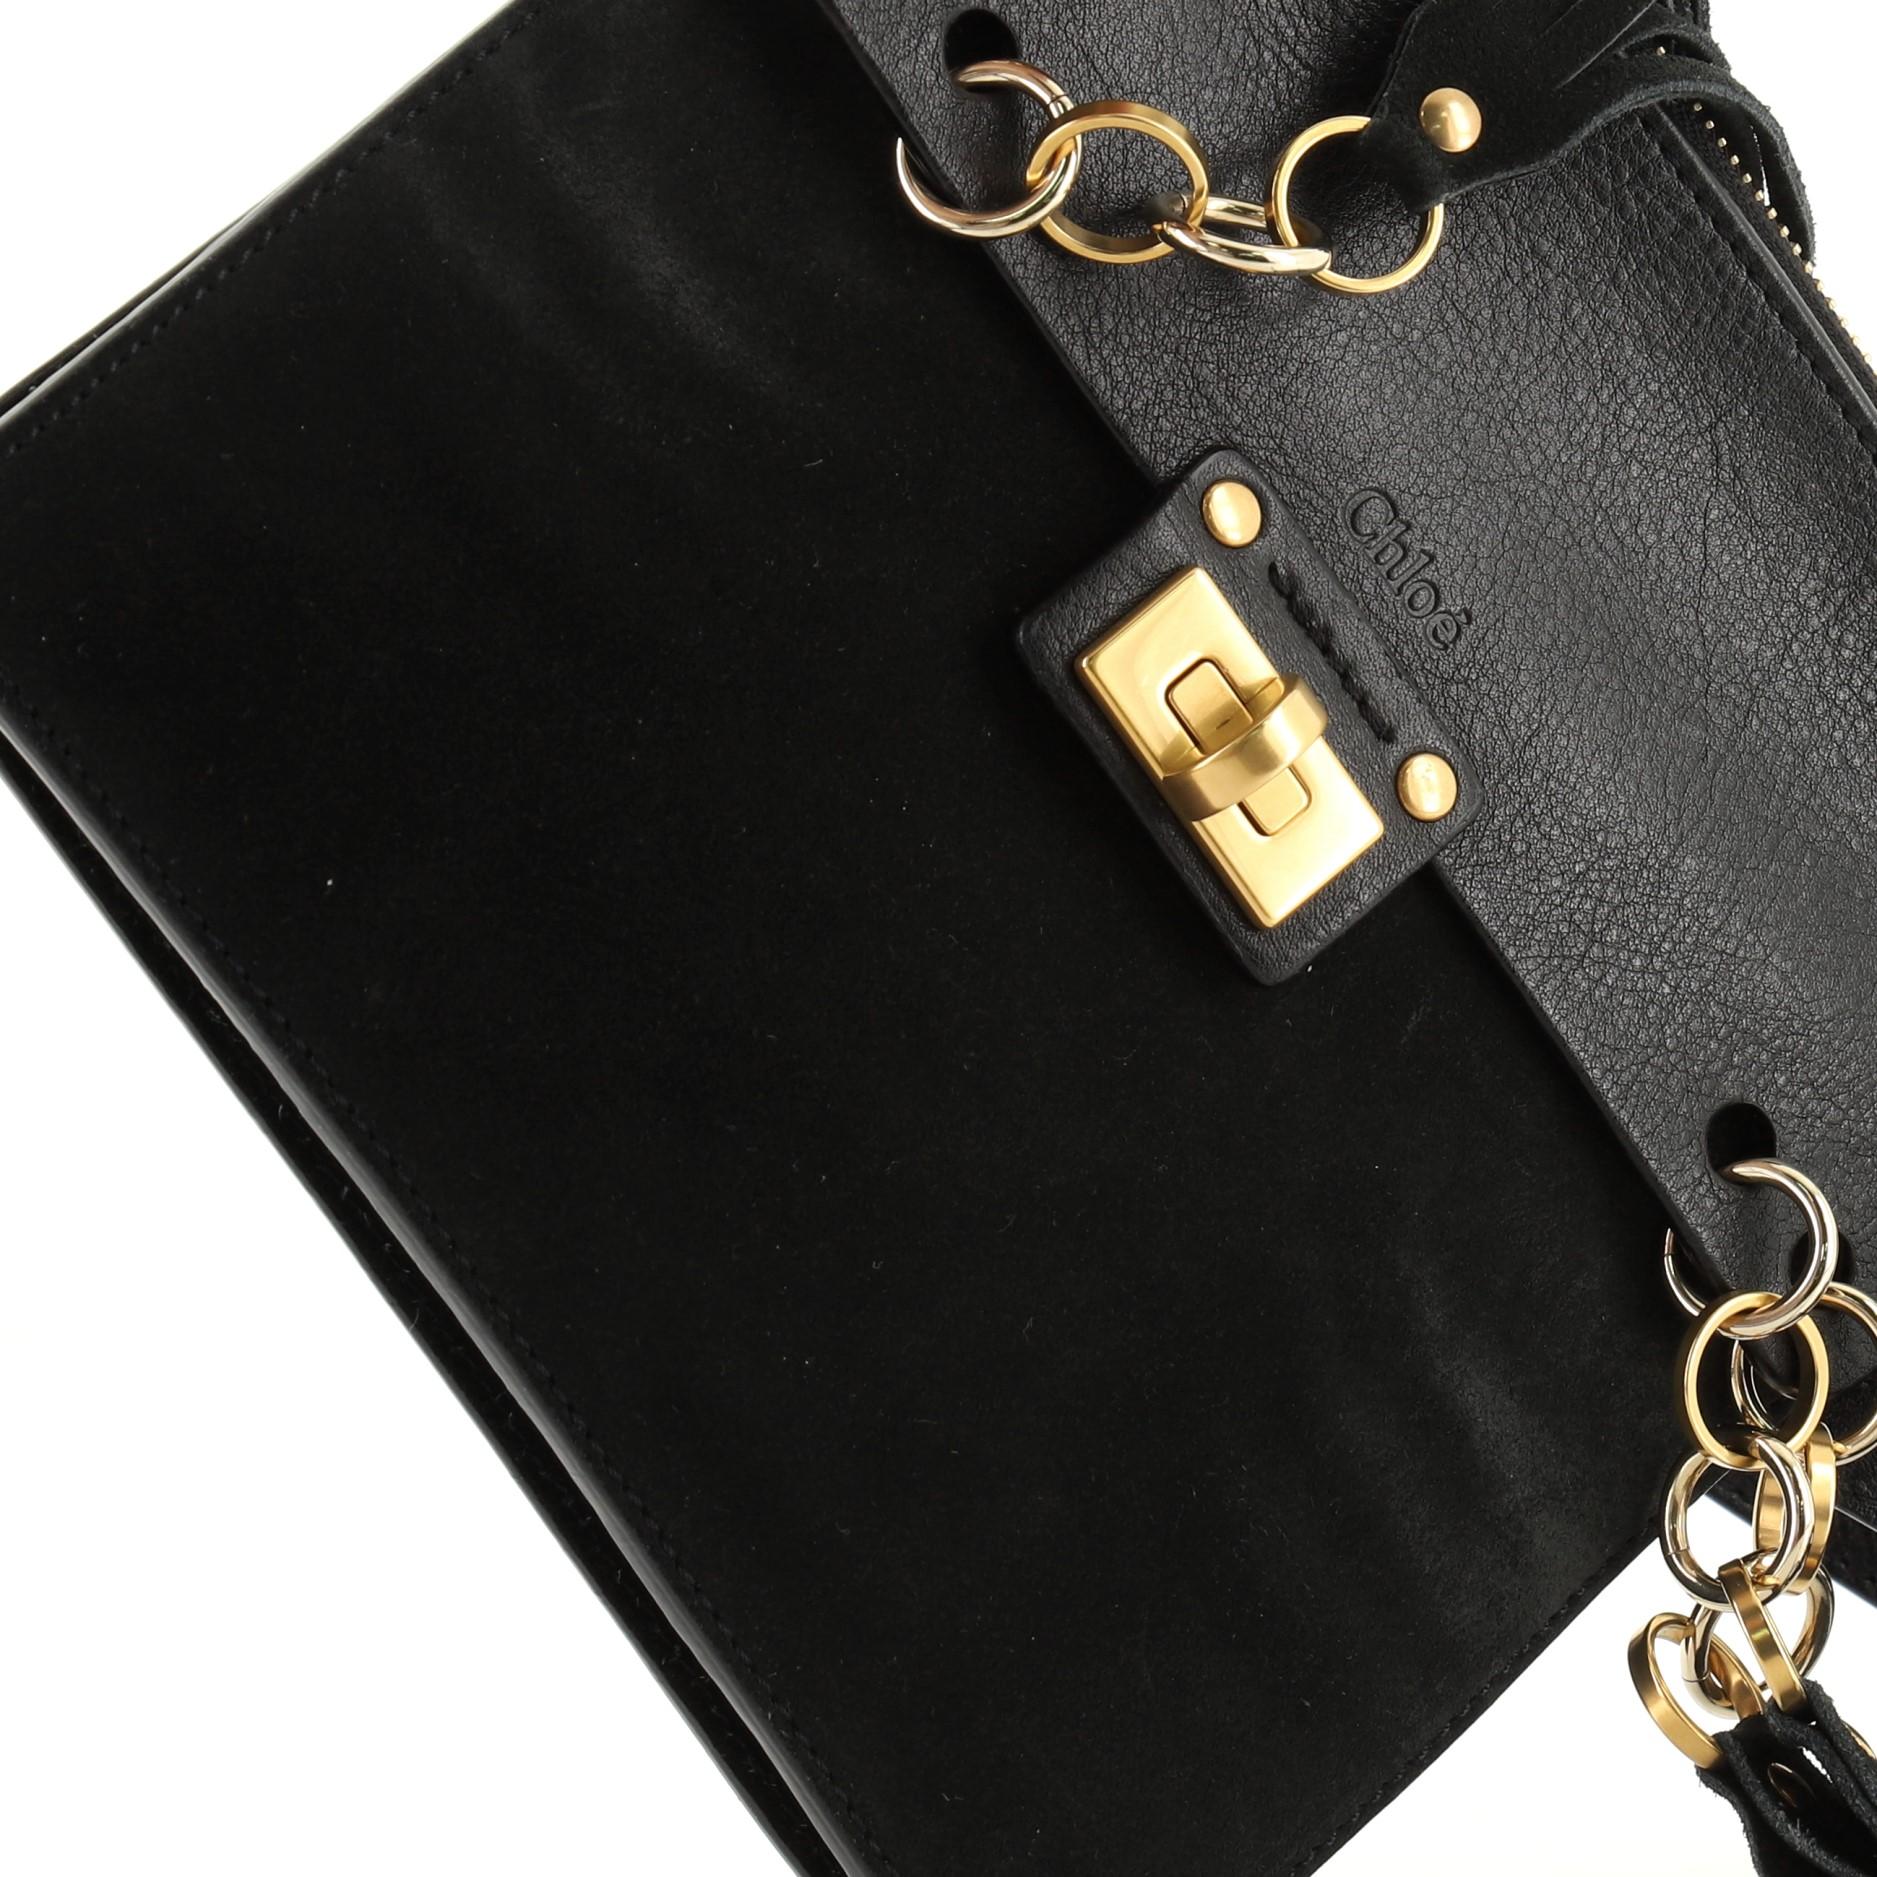 Black Chloe Jane Crossbody Bag Leather and Suede Small